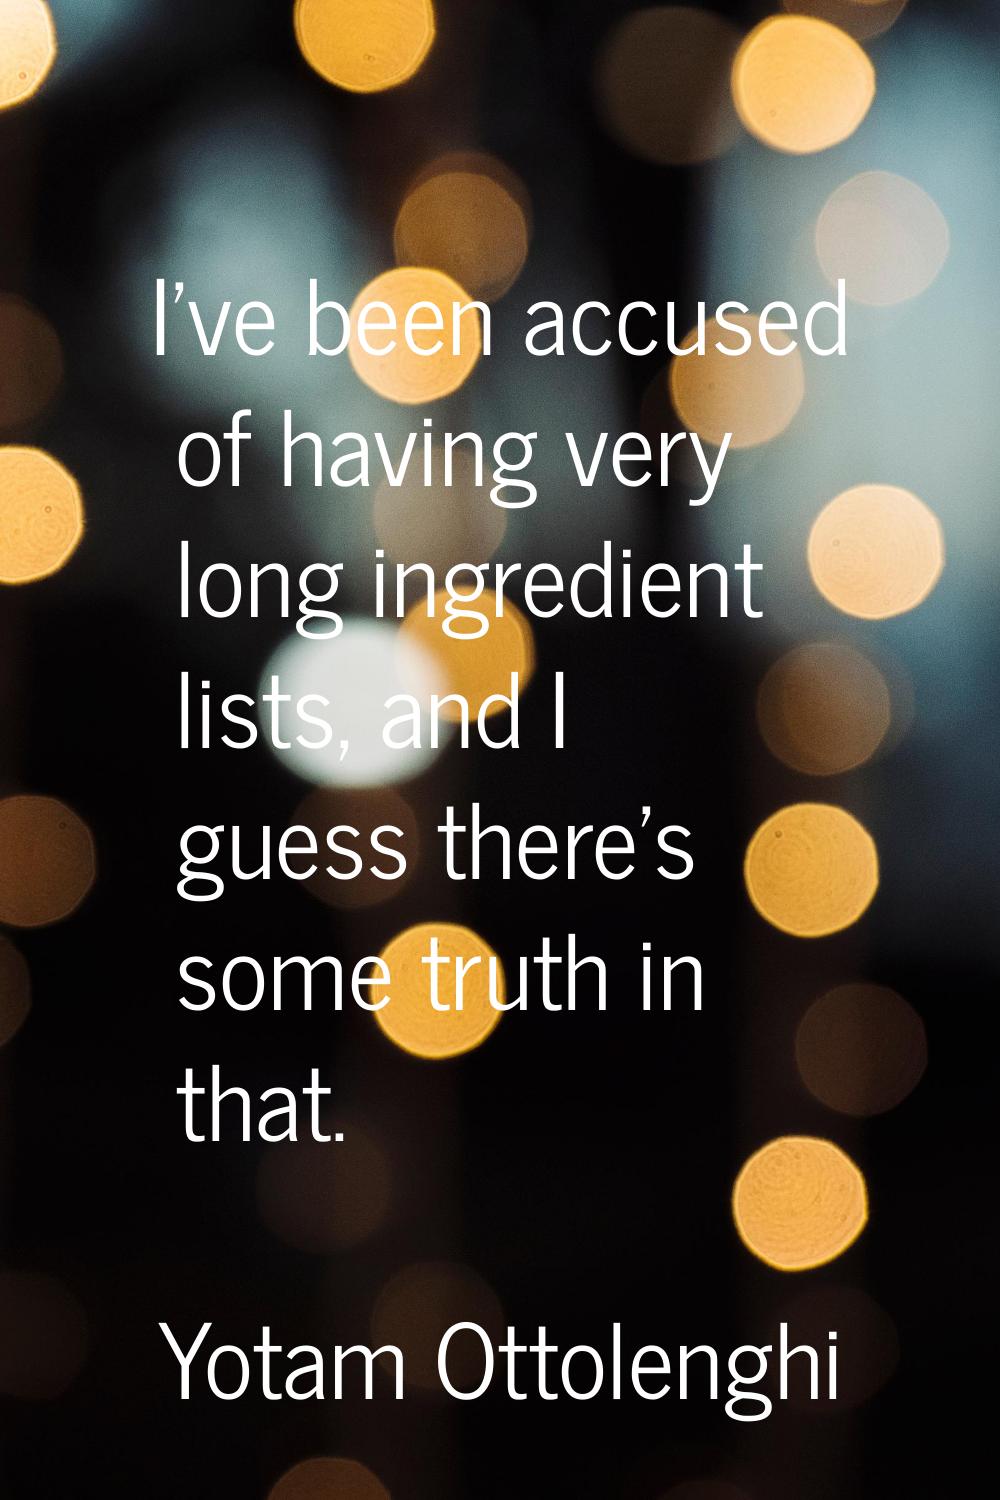 I've been accused of having very long ingredient lists, and I guess there's some truth in that.